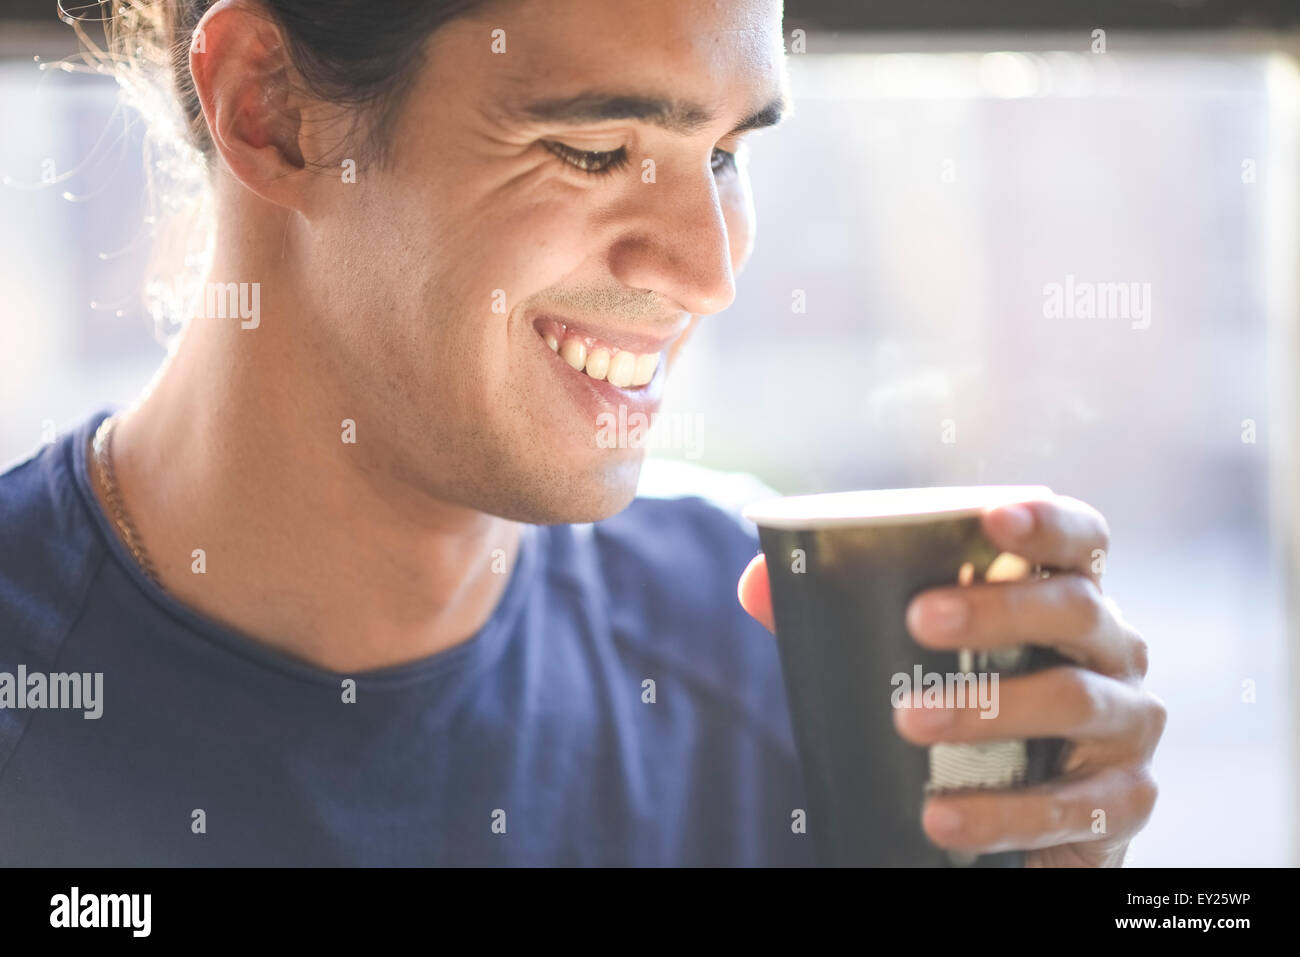 Young man holding coffee cup, indoors Stock Photo